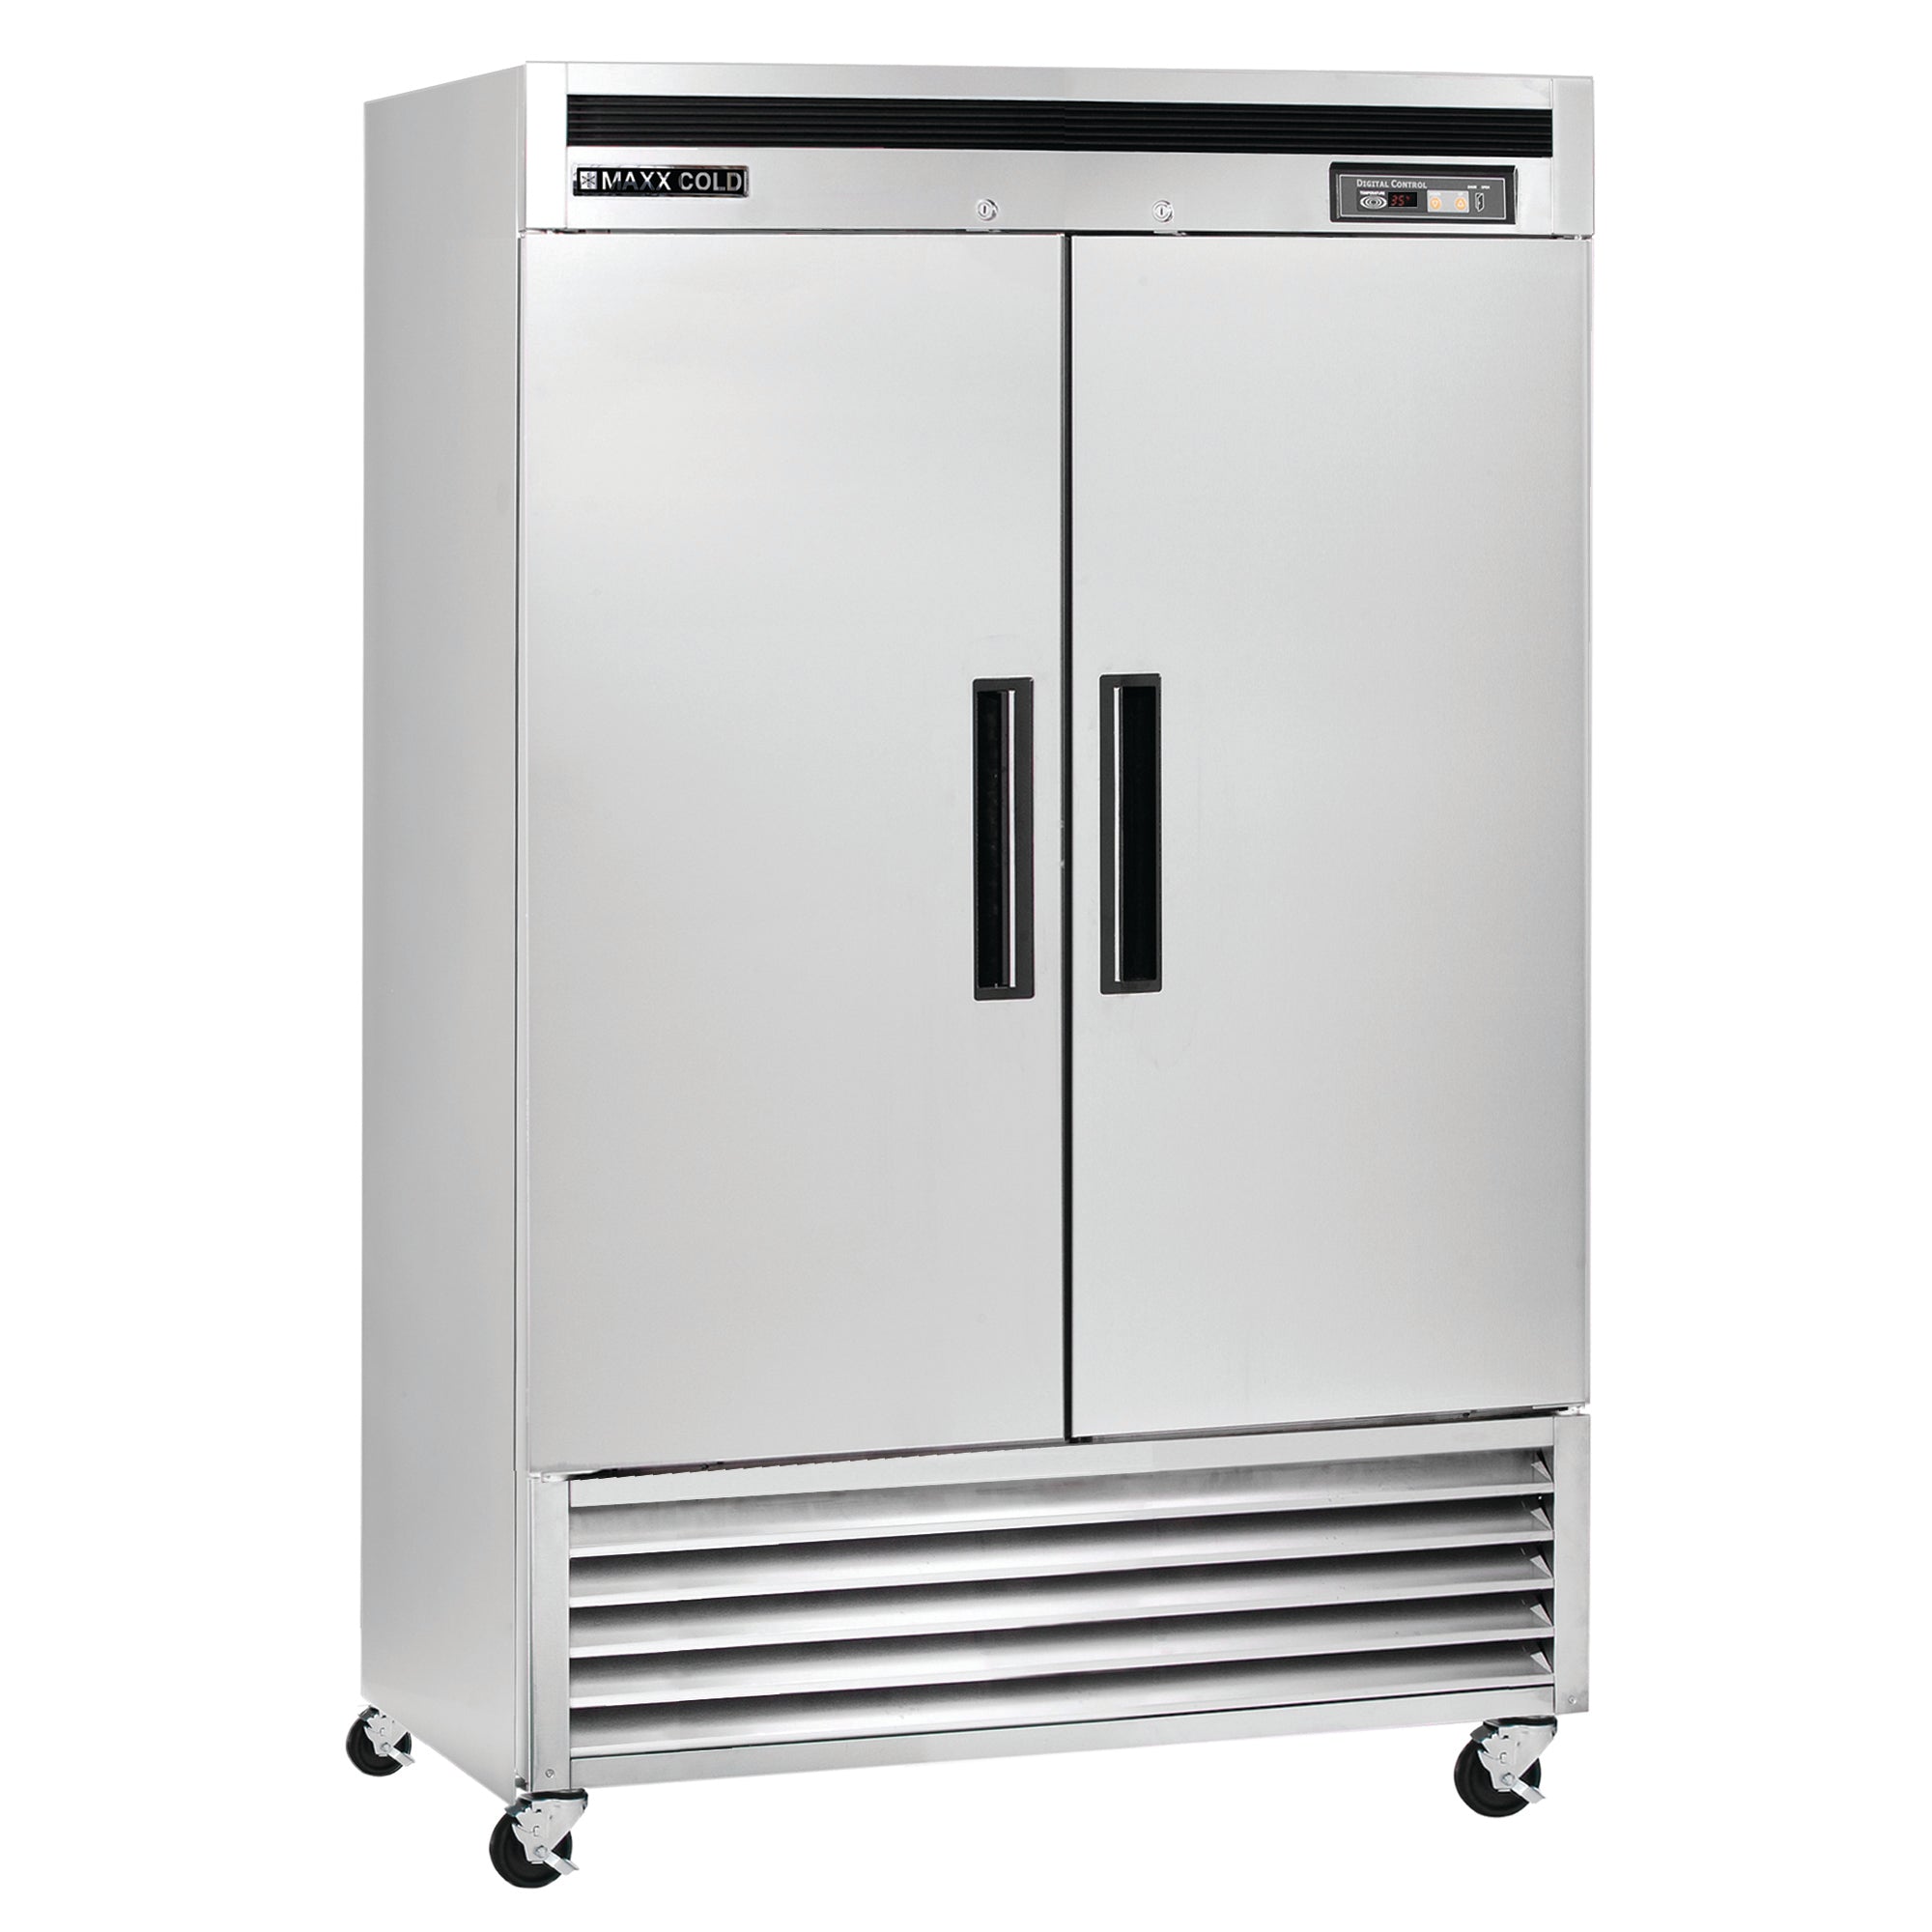 Maxx Cold - MCR-49FDHC, Maxx Cold Double Door Reach-In Refrigerator, Bottom Mount, 54"W, 49 cu. ft. Storage Capacity, Energy Star Rated, in Stainless Steel